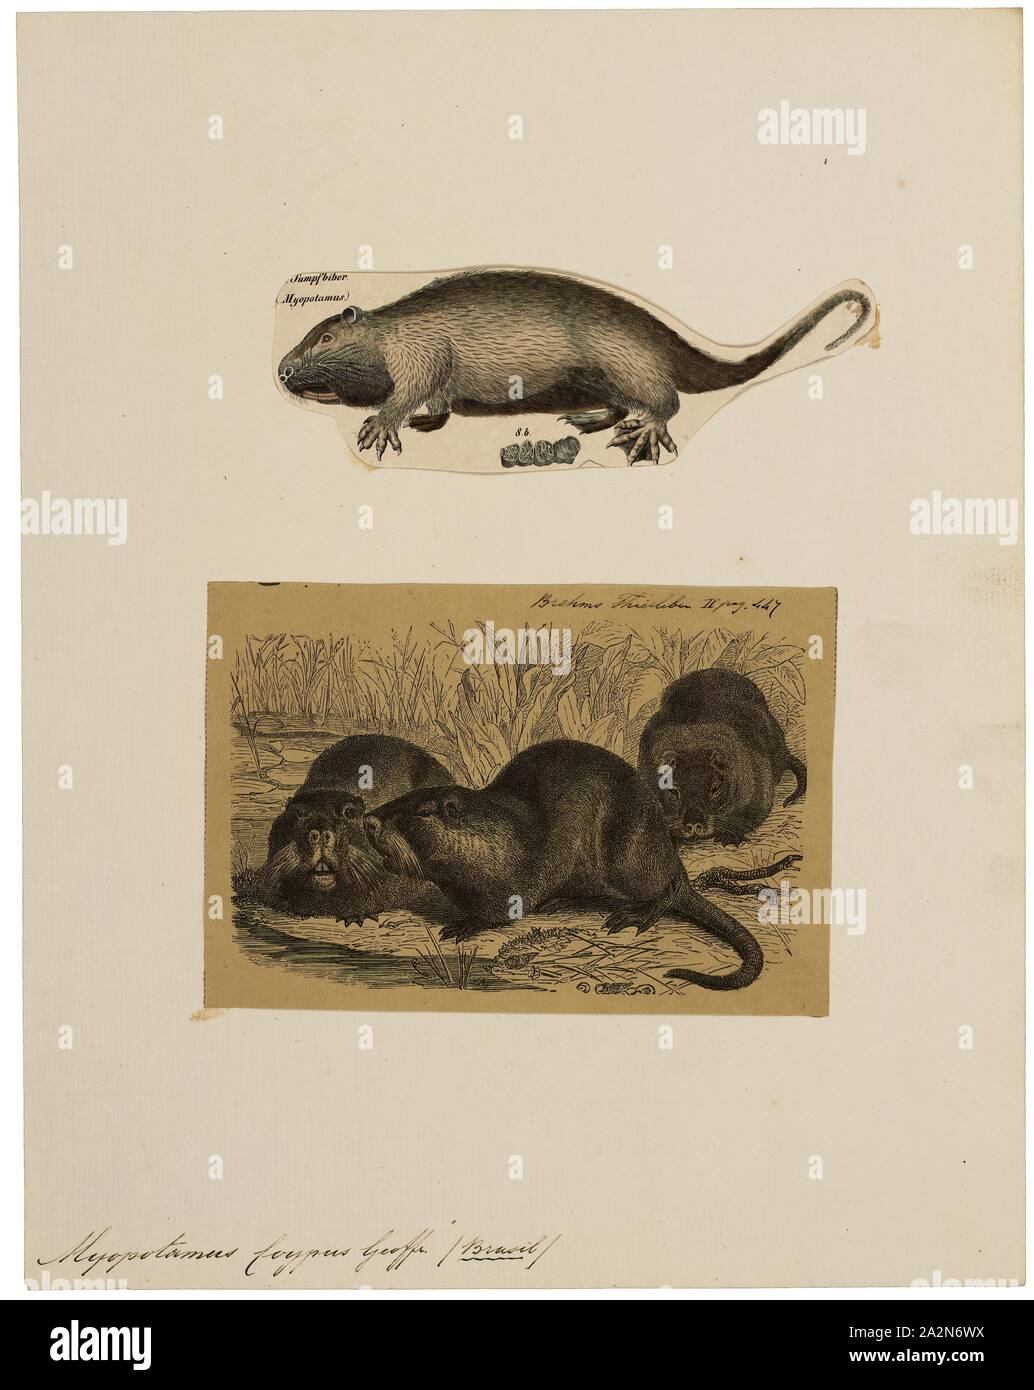 Myopotamus coypus, Print, The coypu, also known as the nutria, is a large, herbivorous, semiaquatic rodent. Classified for a long time as the only member of the family Myocastoridae. Myocastor is actually nested within Echimyidae, the family of the spiny rats. The coypu lives in burrows alongside stretches of water, and feeds on river plant stems. Originally native to subtropical and temperate South America, it has since been introduced to North America, Europe, Asia, and Africa, primarily by fur farmers. Although it is still hunted and trapped for its fur in some regions, its destructive Stock Photo